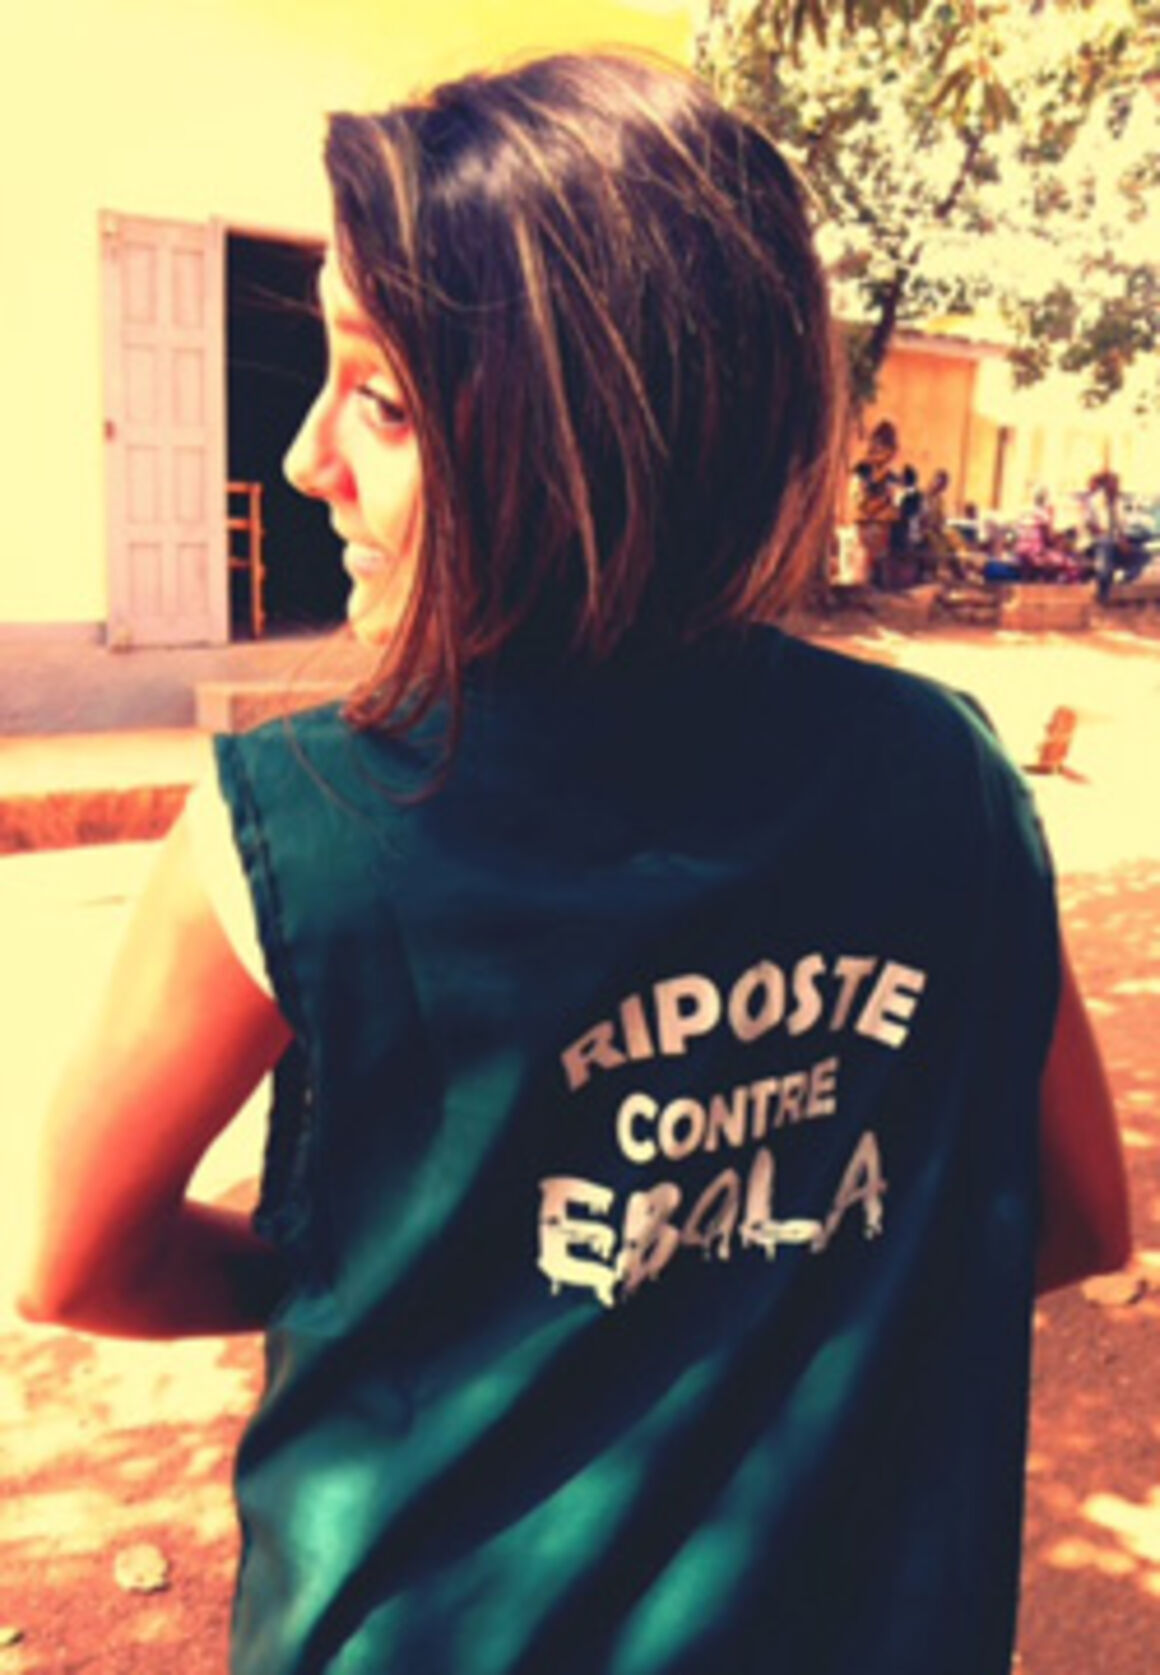 EPIET Postcard from the field - EPIET Fellow Cristina, deployed to Guinea during Ebola outbreak, with a t-shirt saying "Riposte contre Ebola"